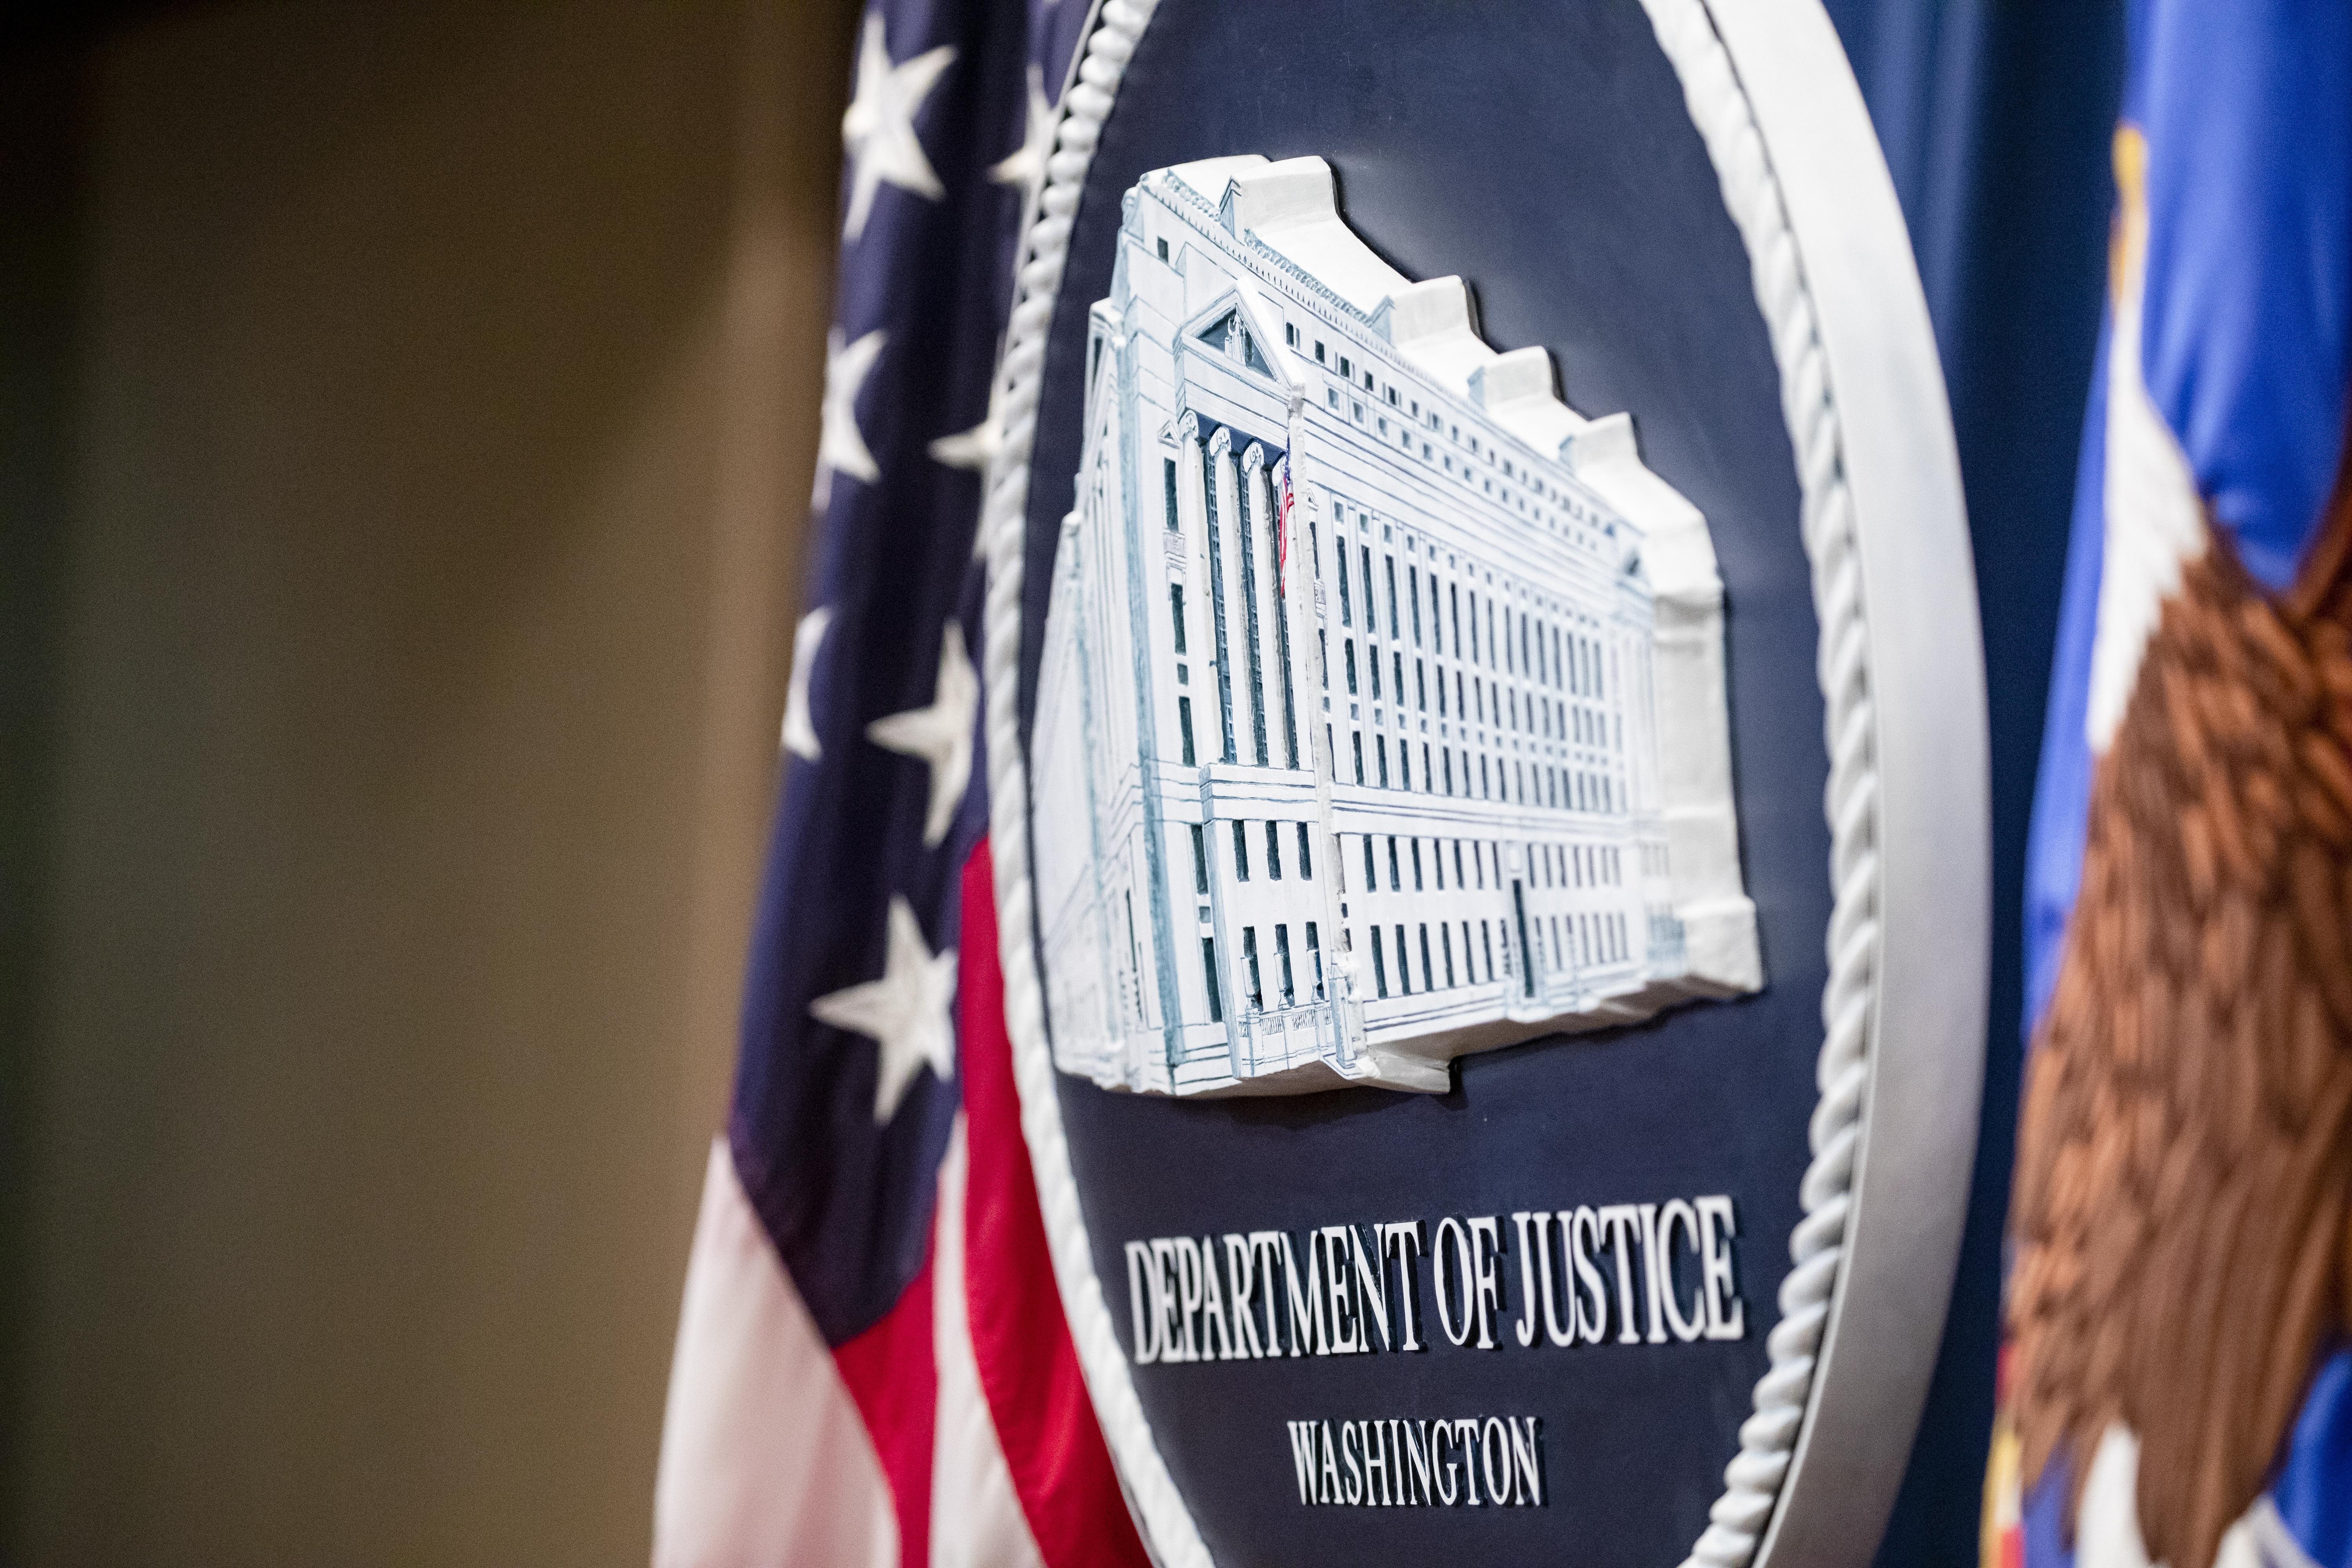 The Justice Department seal, seen at an angle between two U.S. flags